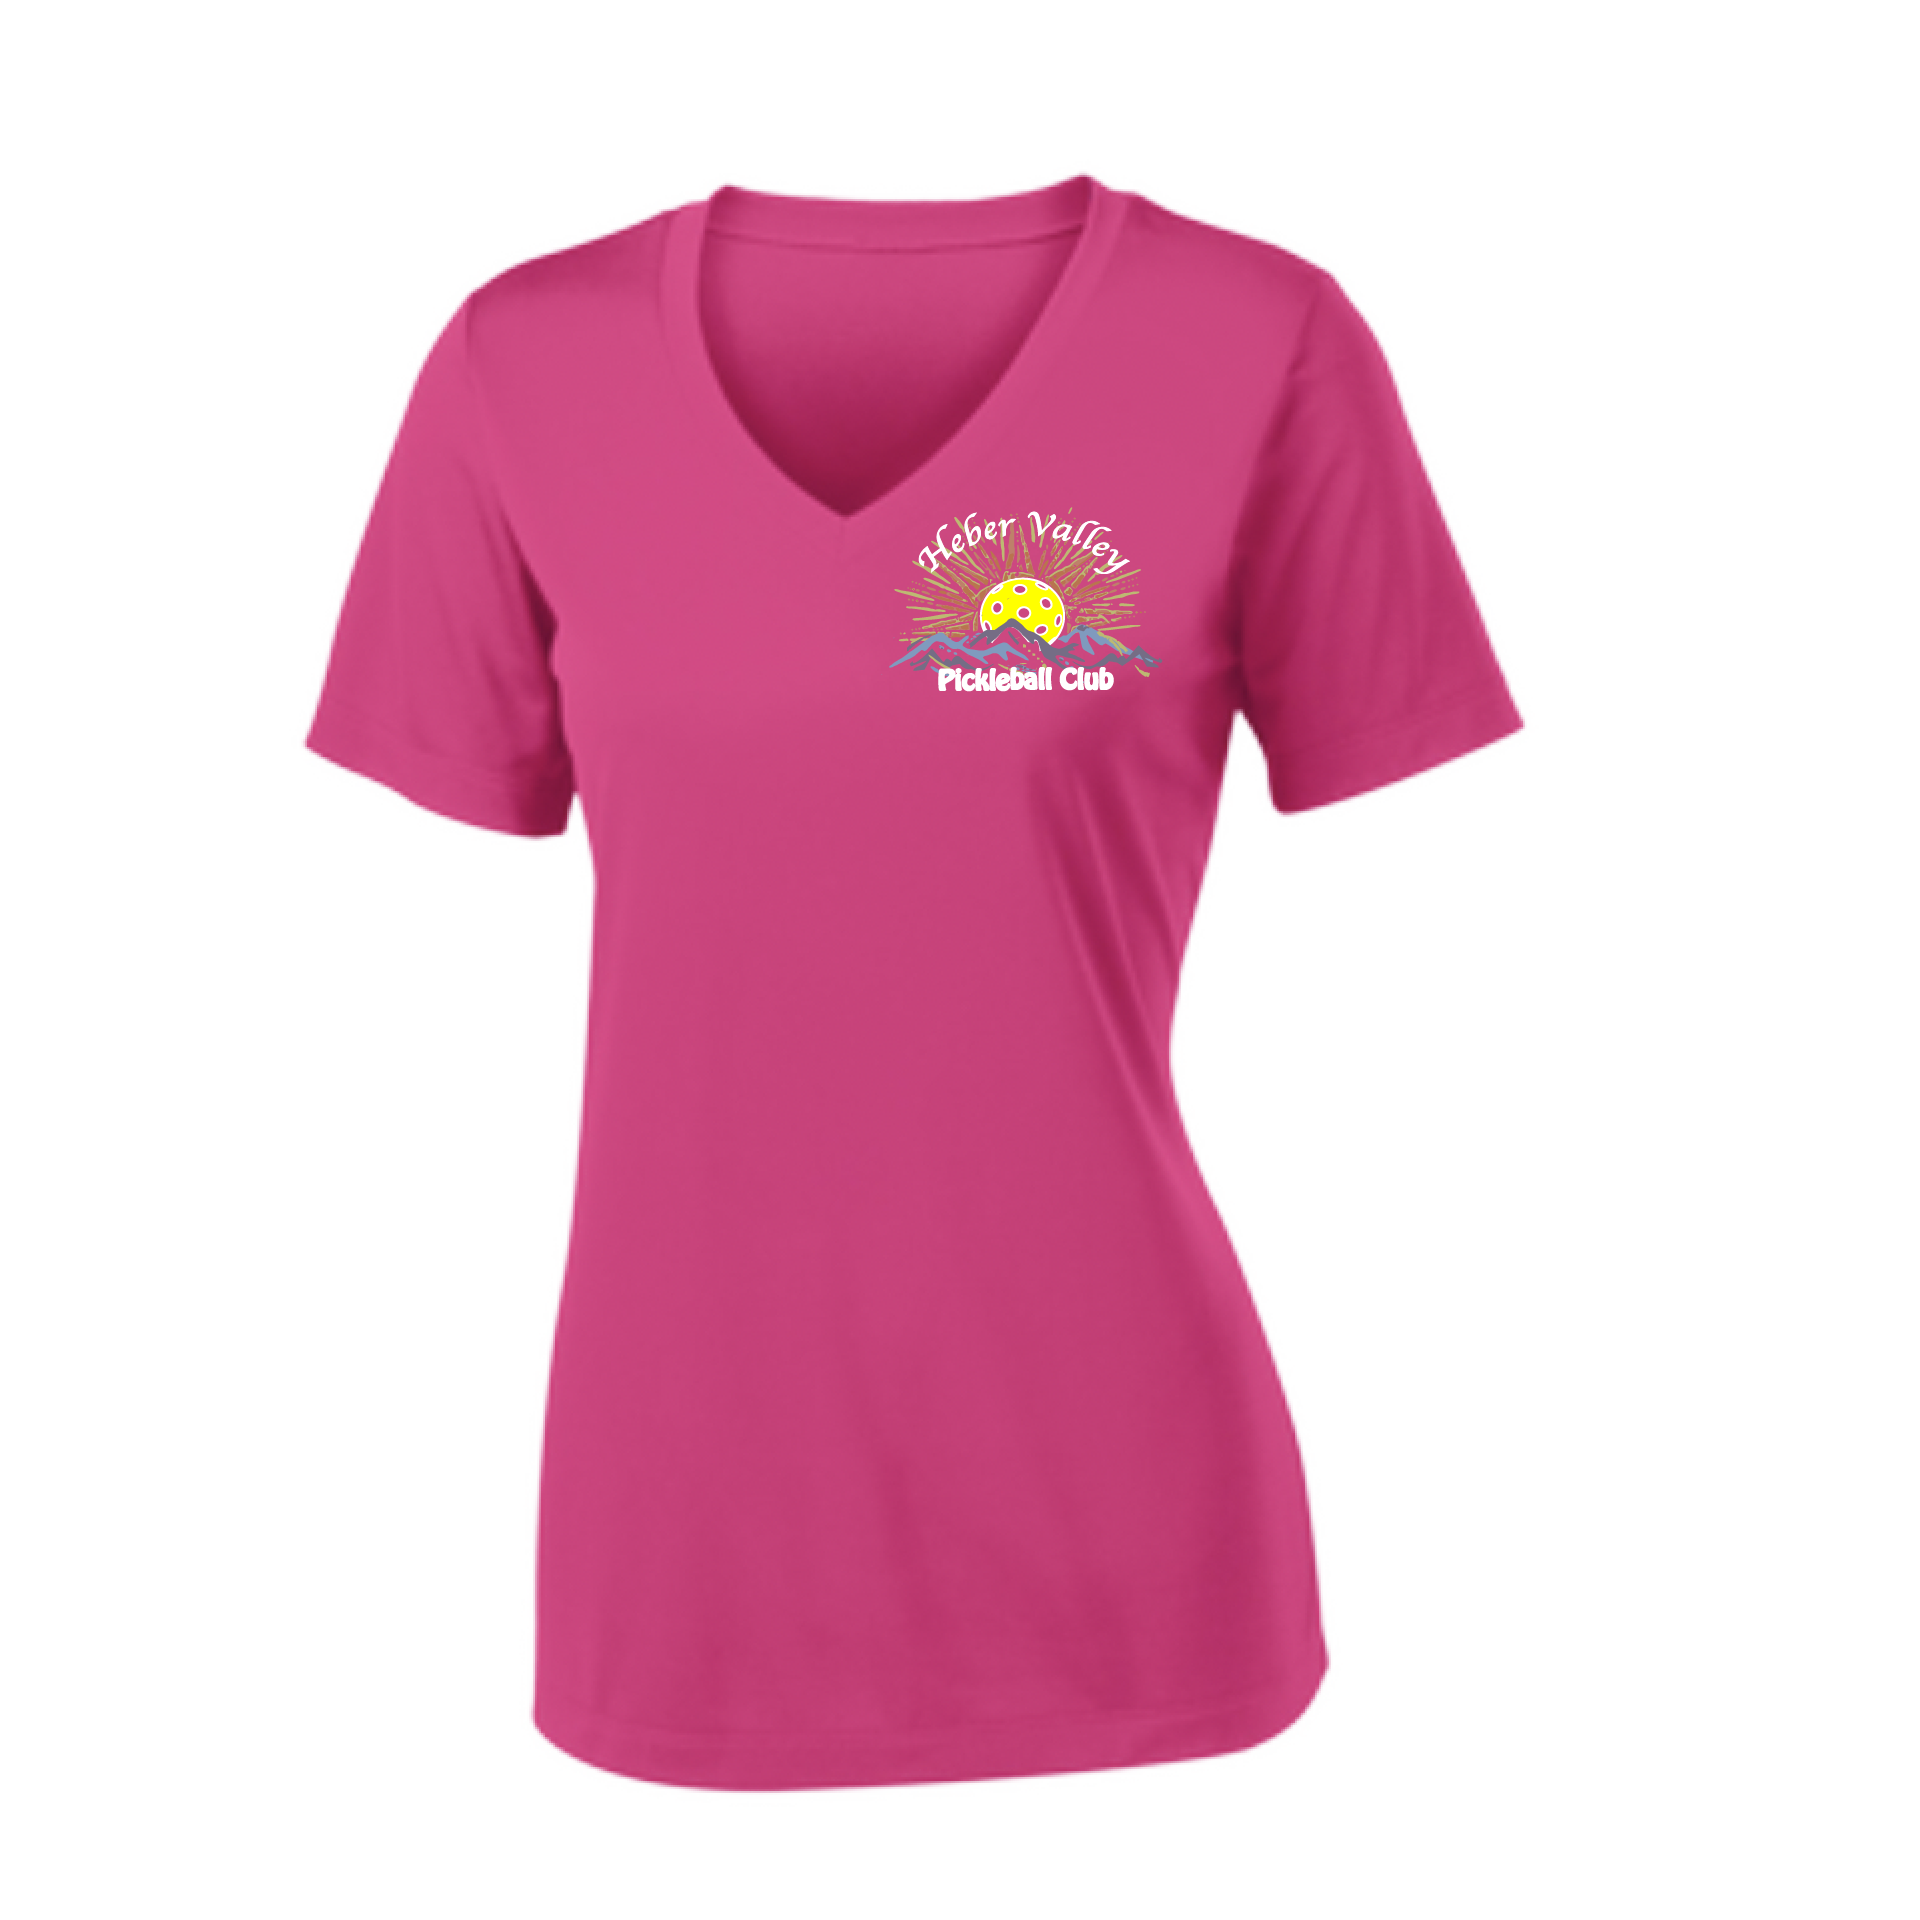 Pickleball Shirt Design: Heber Valley Pickleball Club  Women's Style: Short Sleeve V-Neck  Turn up the volume in this Women's shirt with its perfect mix of softness and attitude. Material is ultra-comfortable with moisture wicking properties and tri-blend softness. PosiCharge technology locks in color. Highly breathable and lightweight.